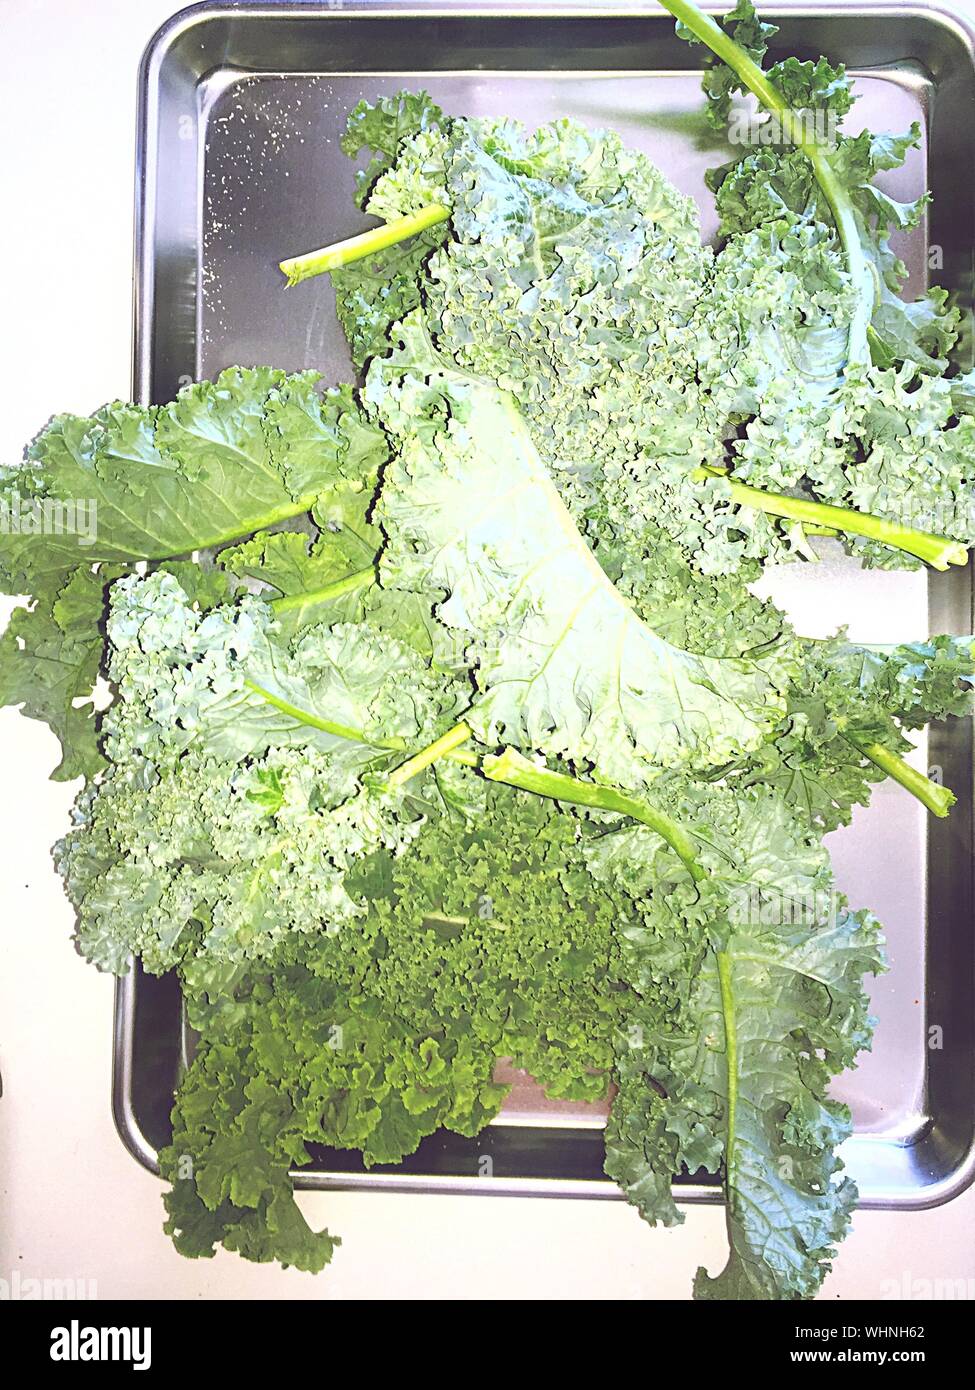 Directly Above View Of Fresh Green Kale In Tray Stock Photo